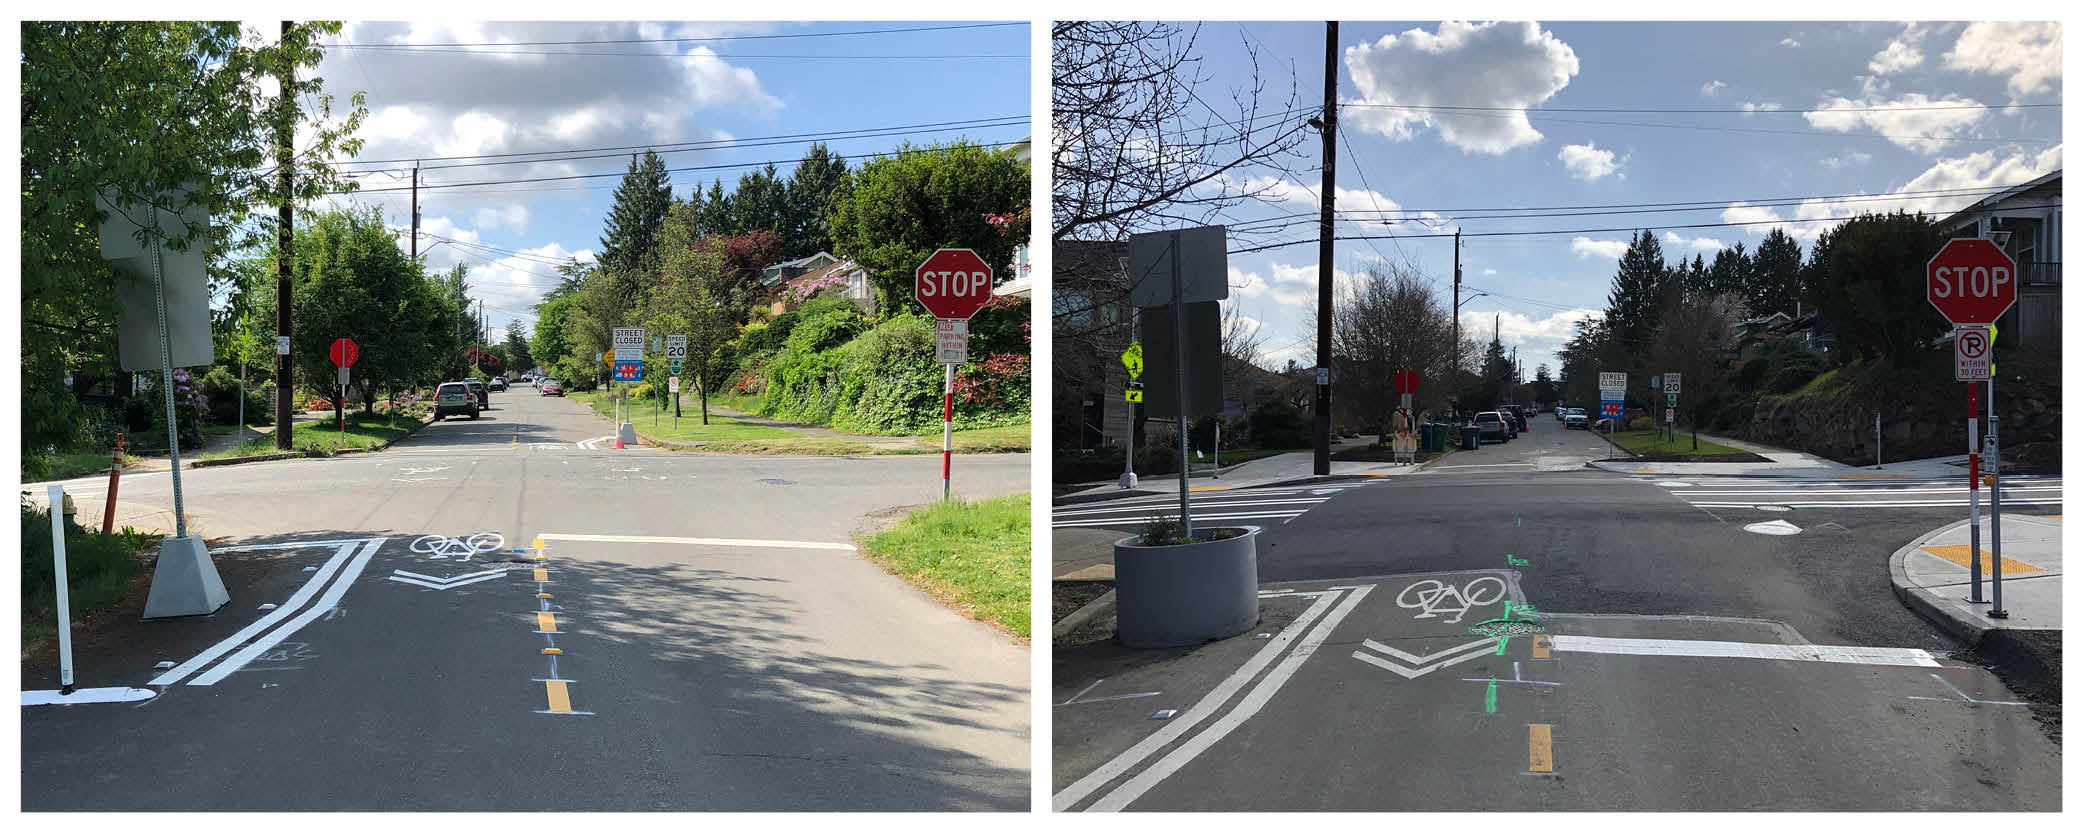 Before and After Photos of newly installed safety elements at 18th Ave S and S College St, including flashing crossing lights and ADA-accessible curb ramps